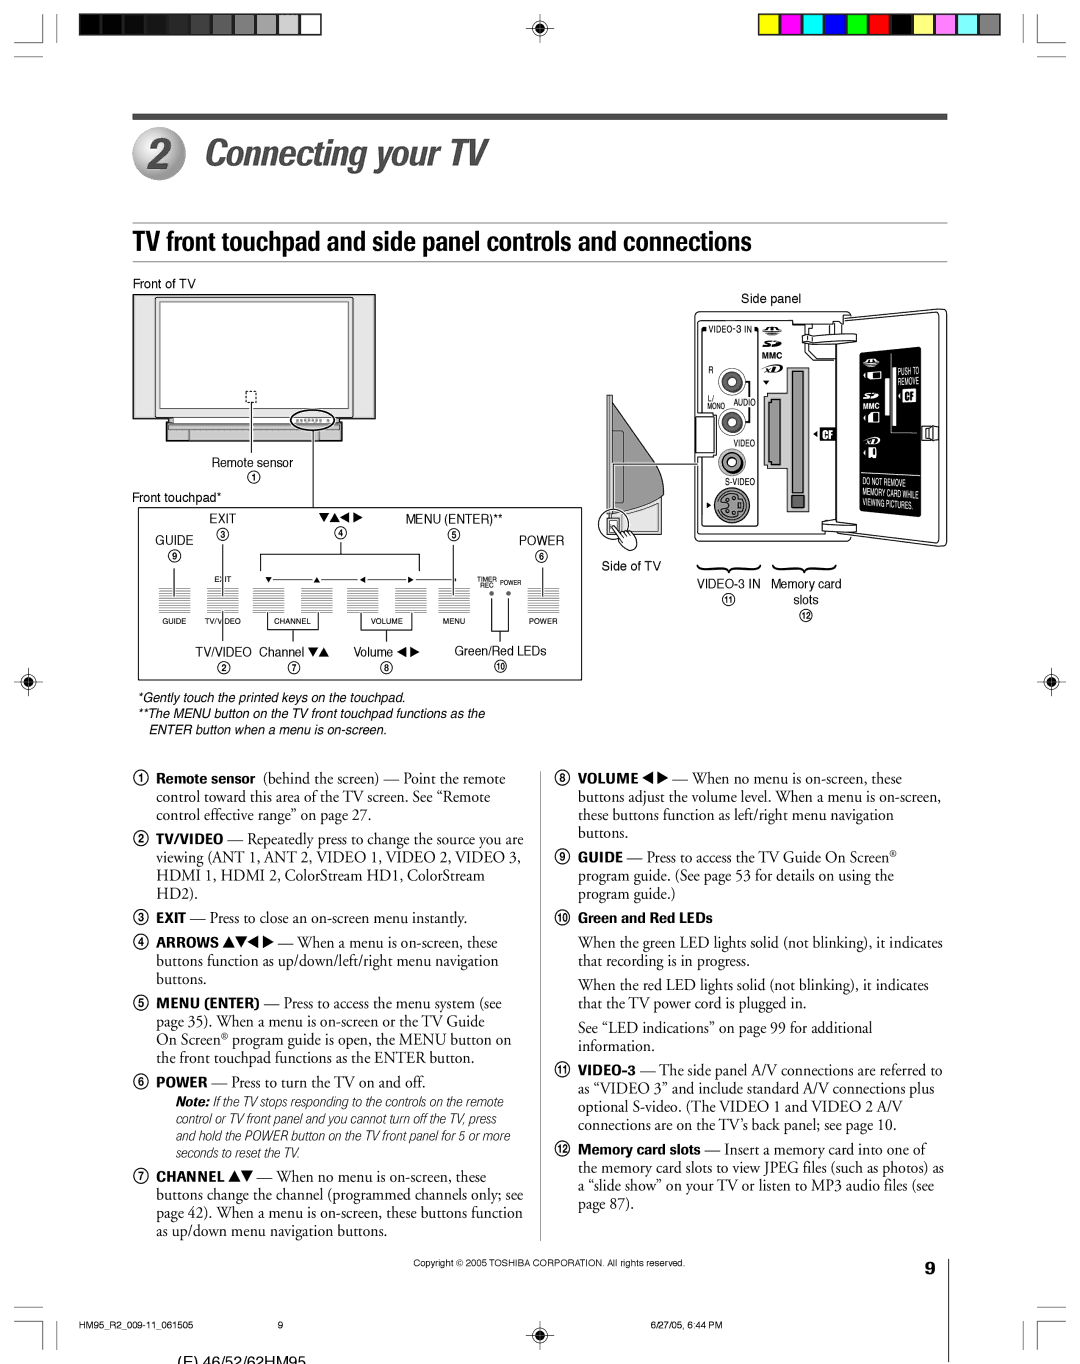 Toshiba 62HM95, 52HM95 Connecting your TV, TV front touchpad and side panel controls and connections, Green and Red LEDs 